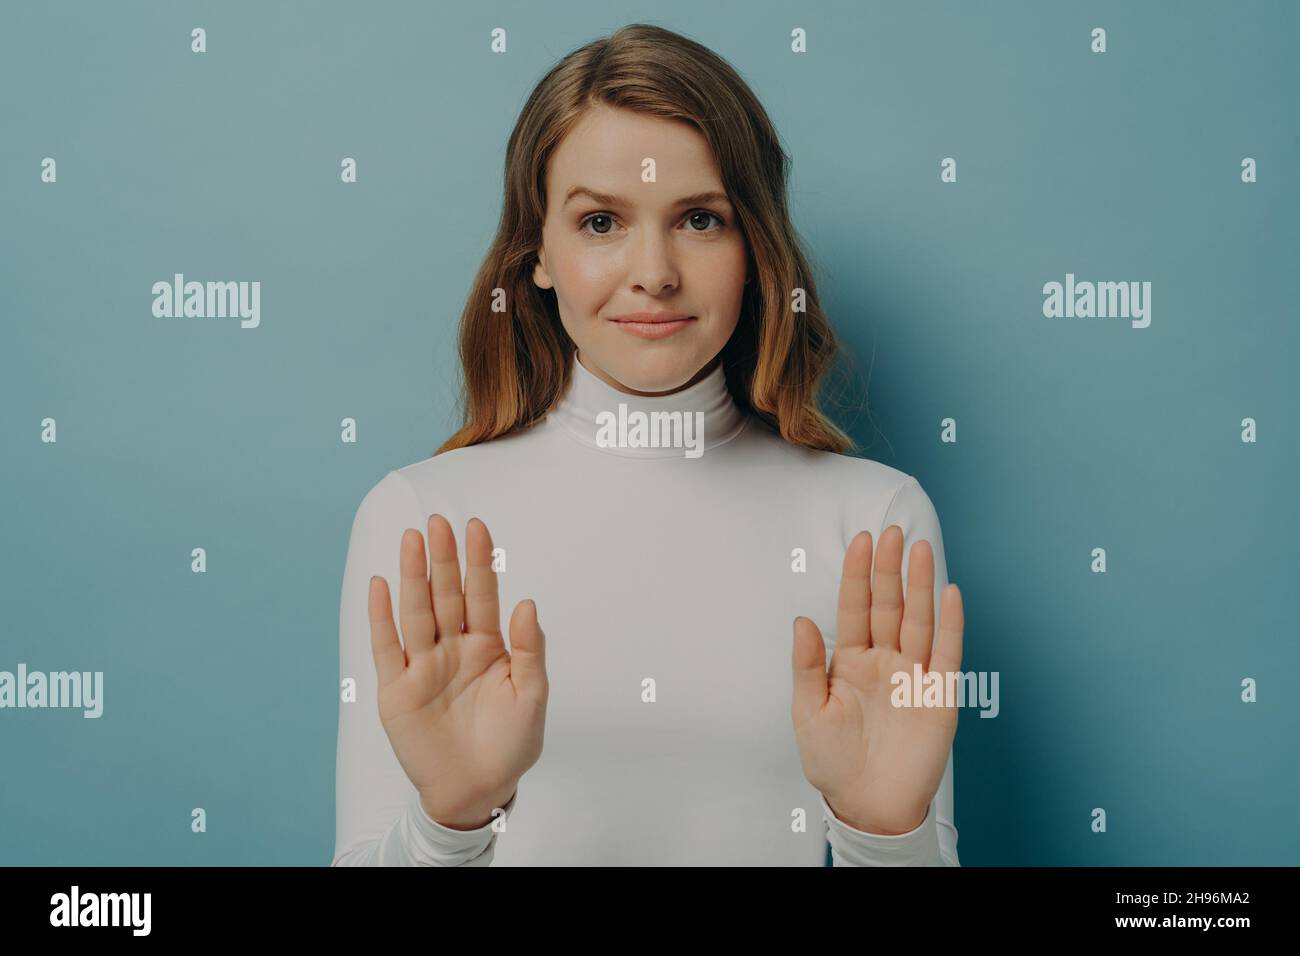 Attractive young focused woman showing stop gesture, saying no, isolated over blue studio background Stock Photo